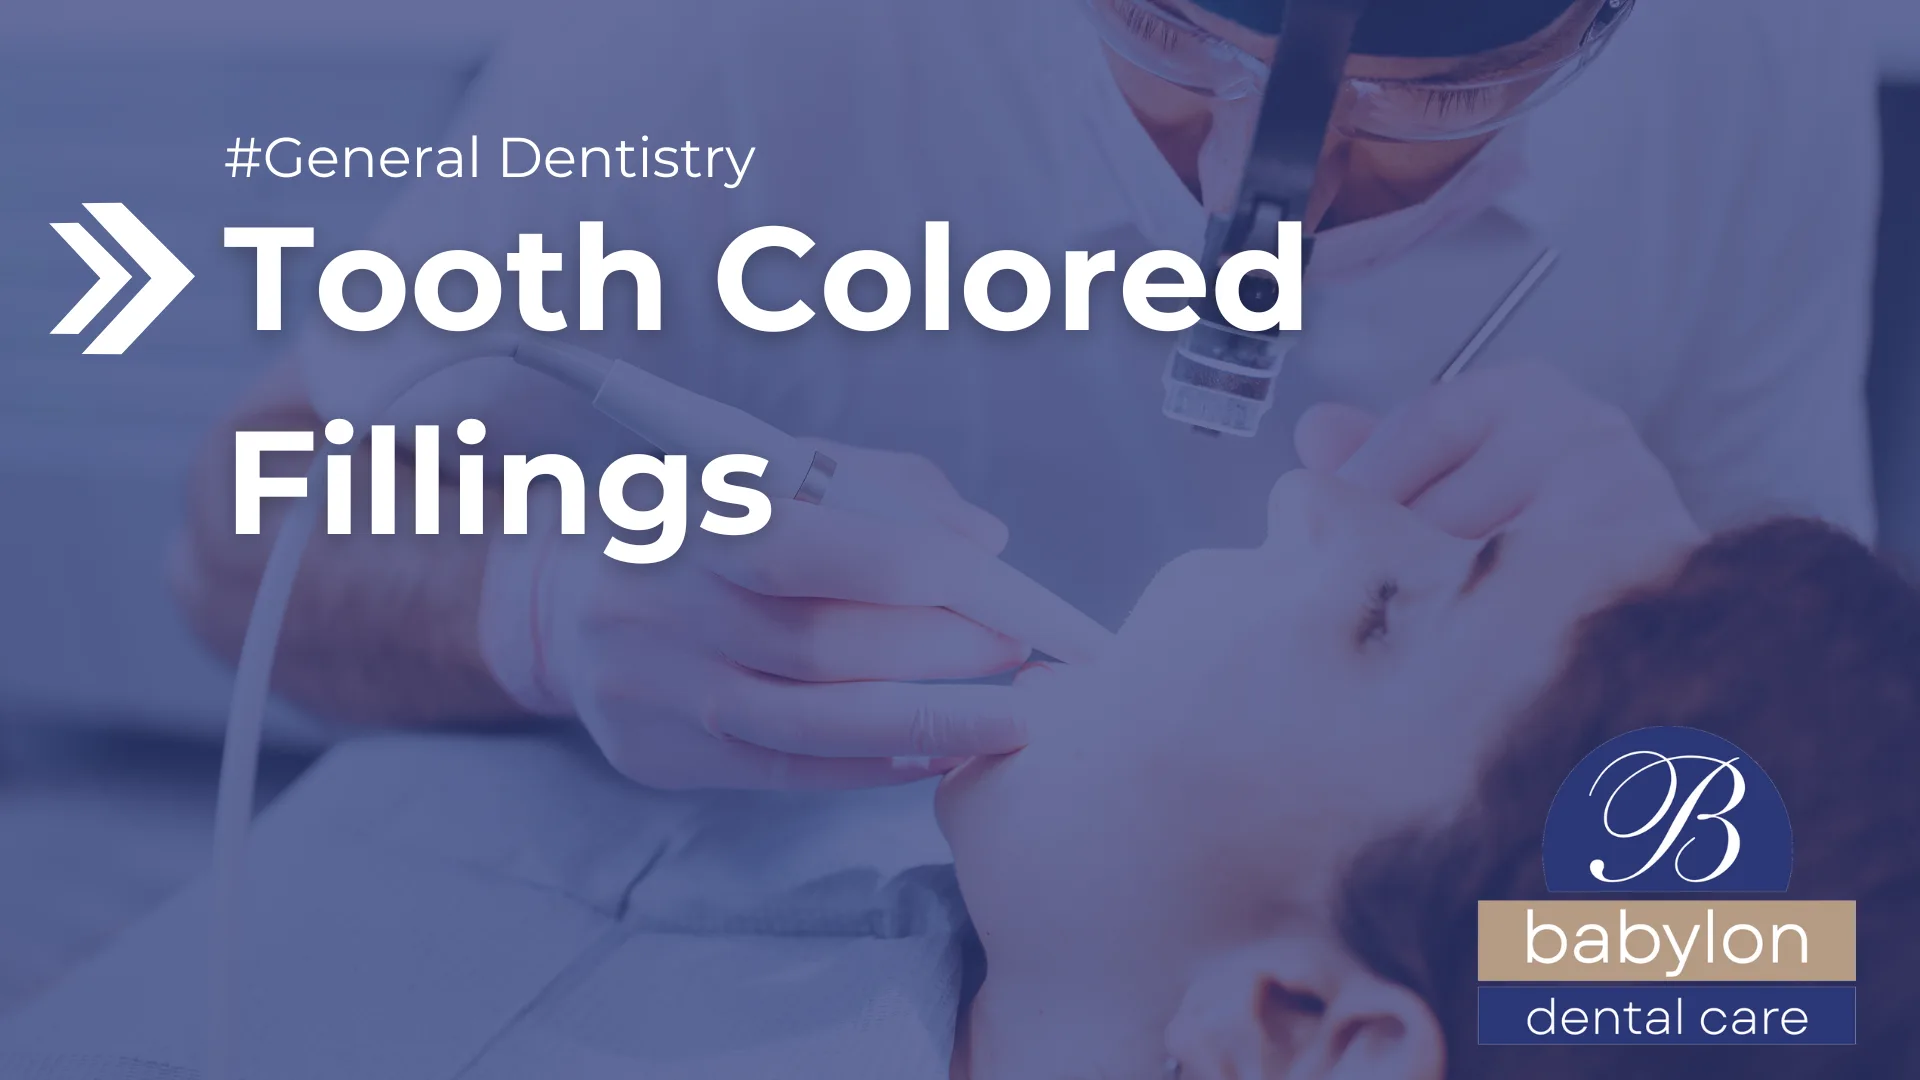 Tooth Colored Fillings Image - new logo